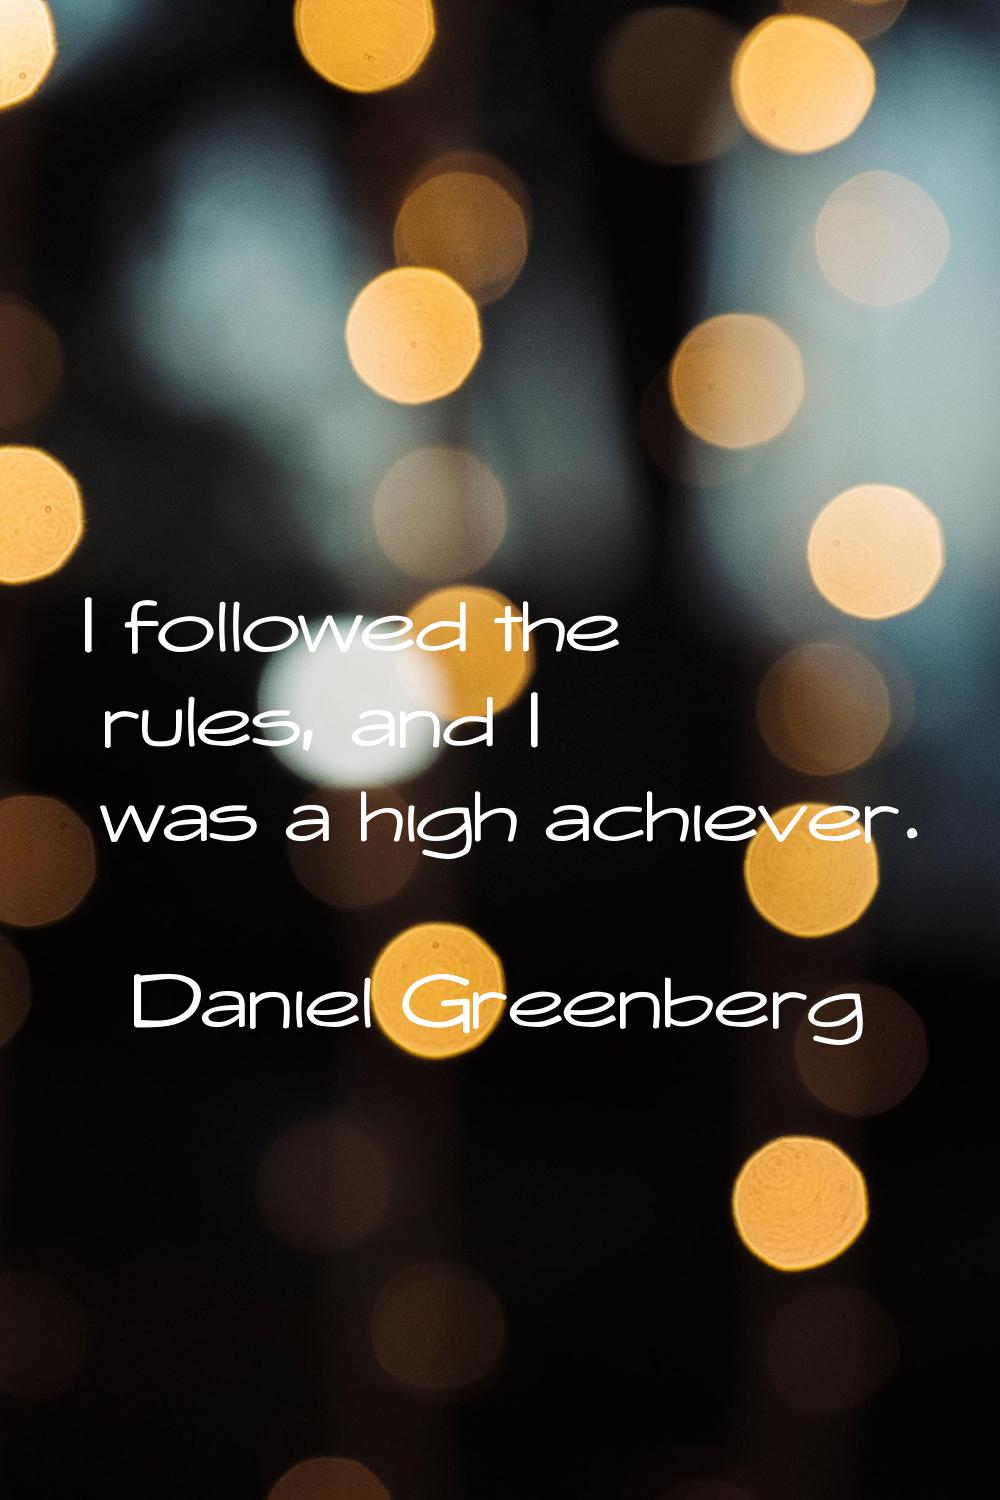 I followed the rules, and I was a high achiever.